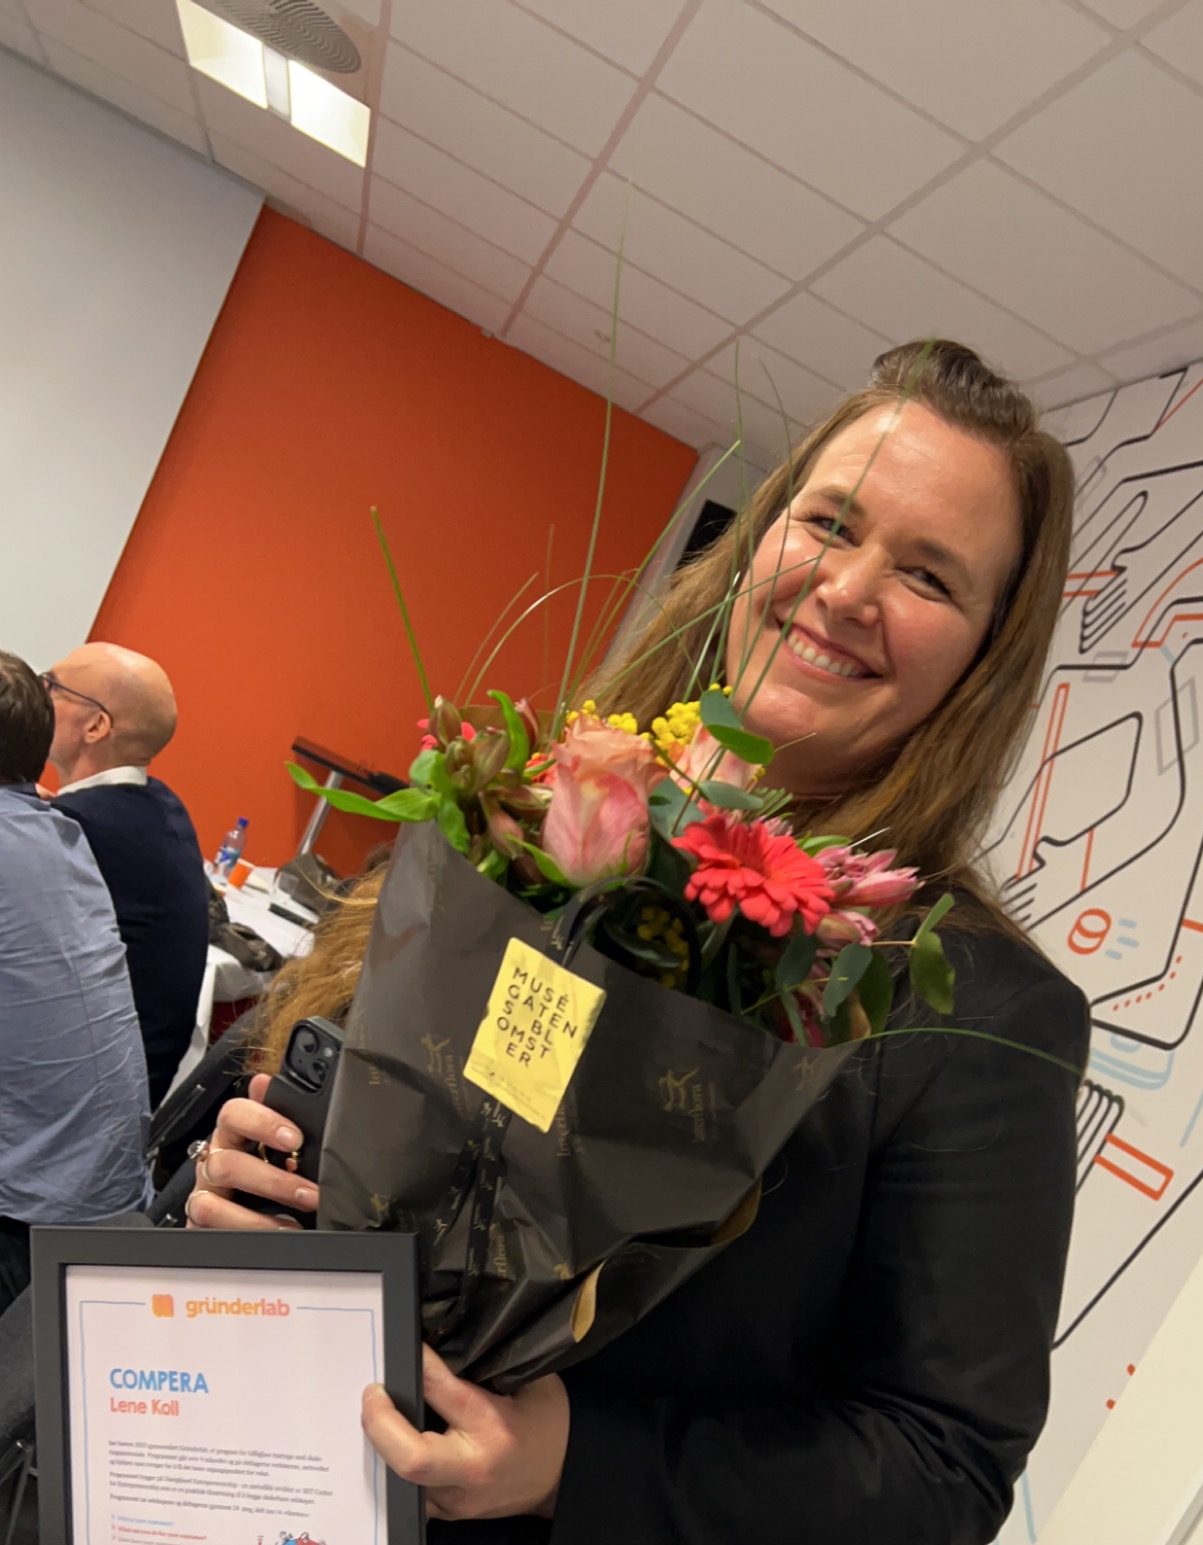 Lene, CEO of Compera, with her award and some flowers